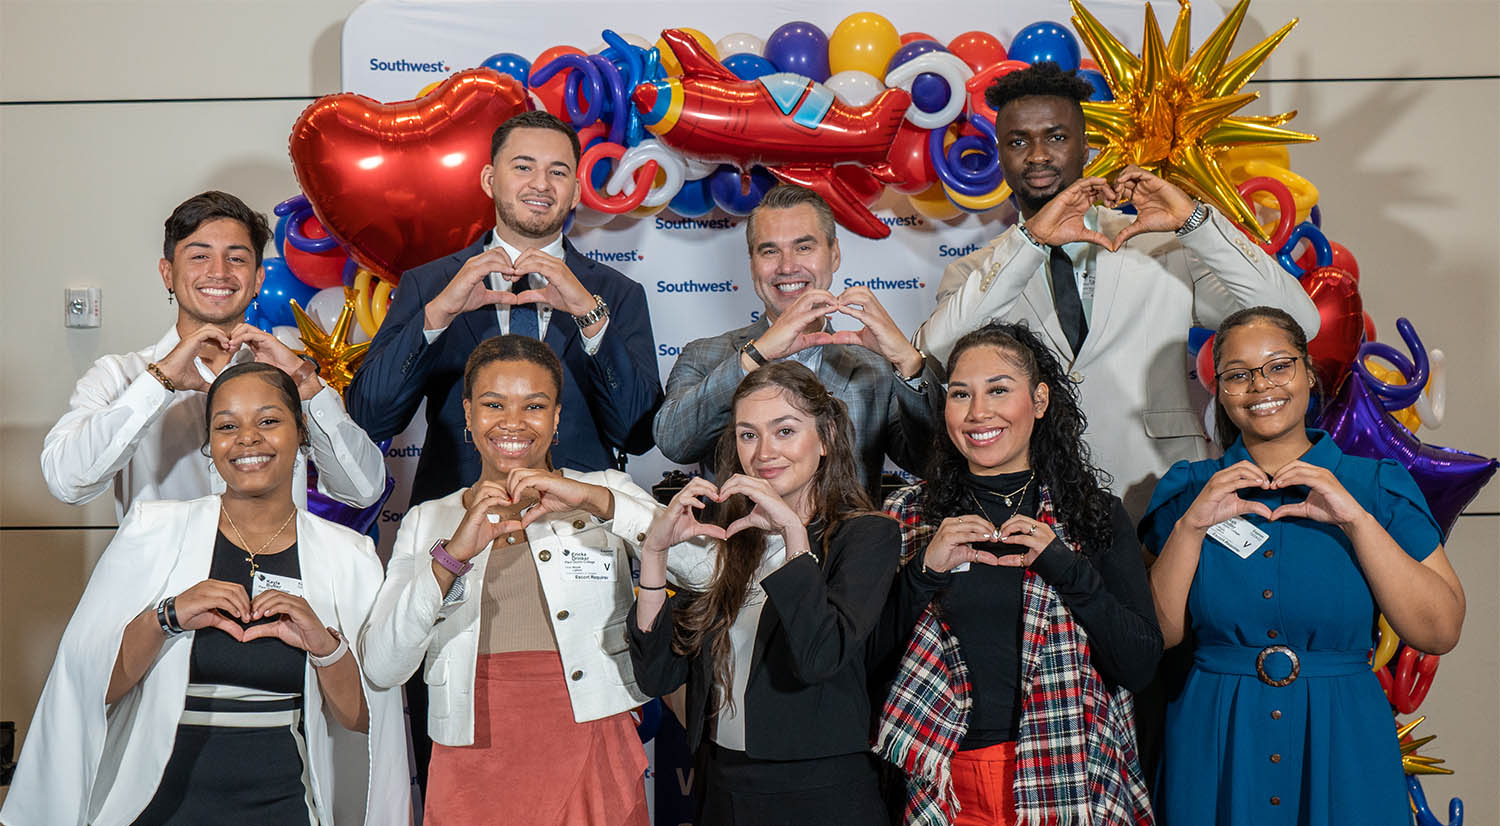 pqc students standing in front of southwest airlines banner making heart symbols with their hands